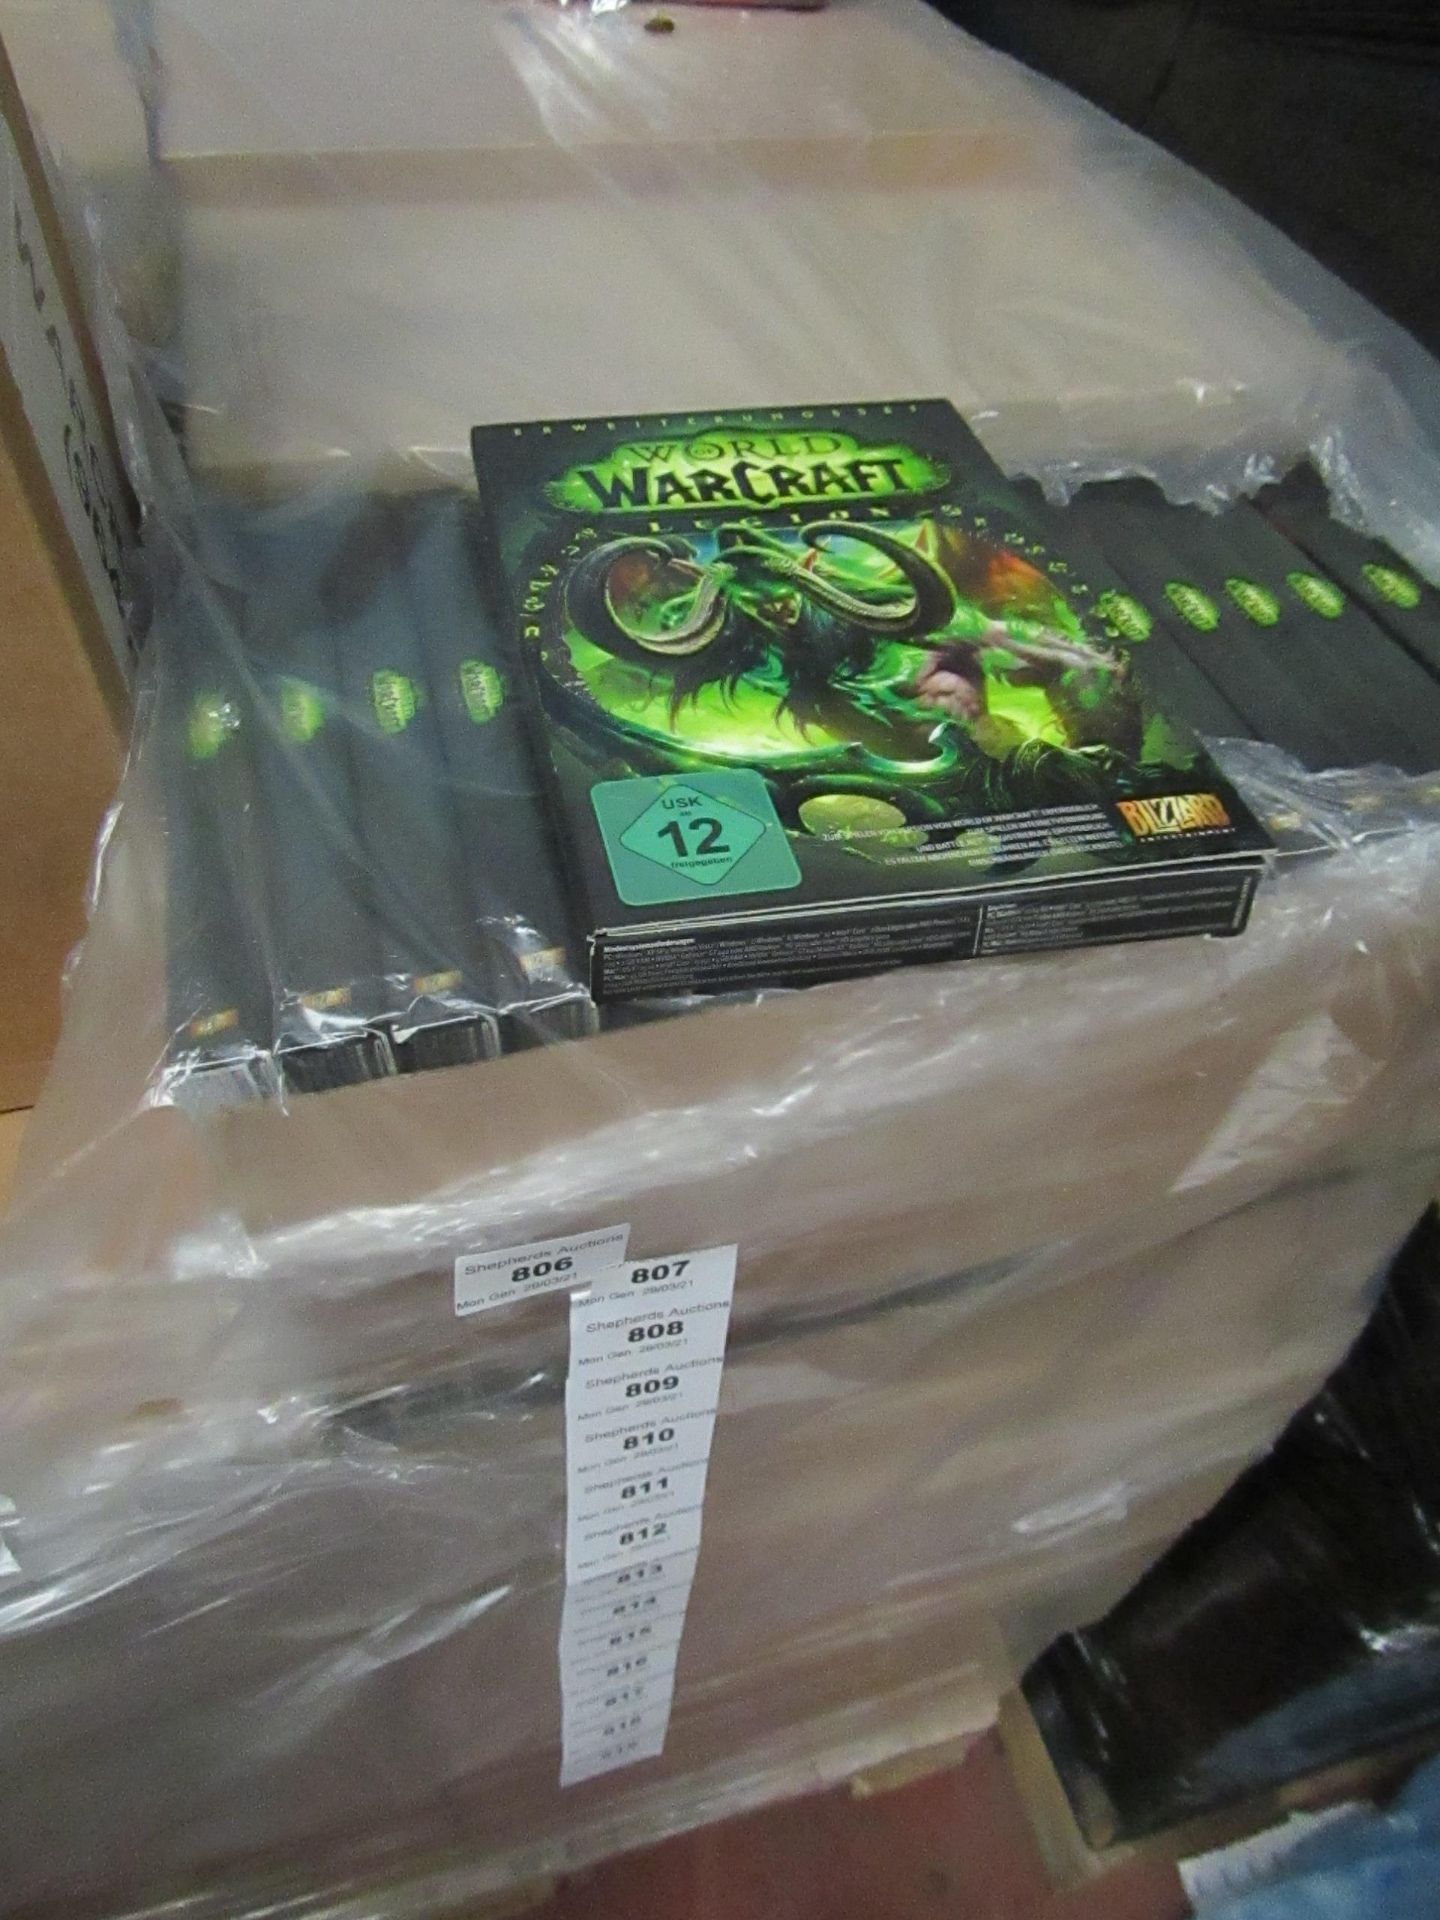 Blizzard - World of Warcraft - Legion Pc Game - Brand New Sealed & Packaged. Item is in Foreign